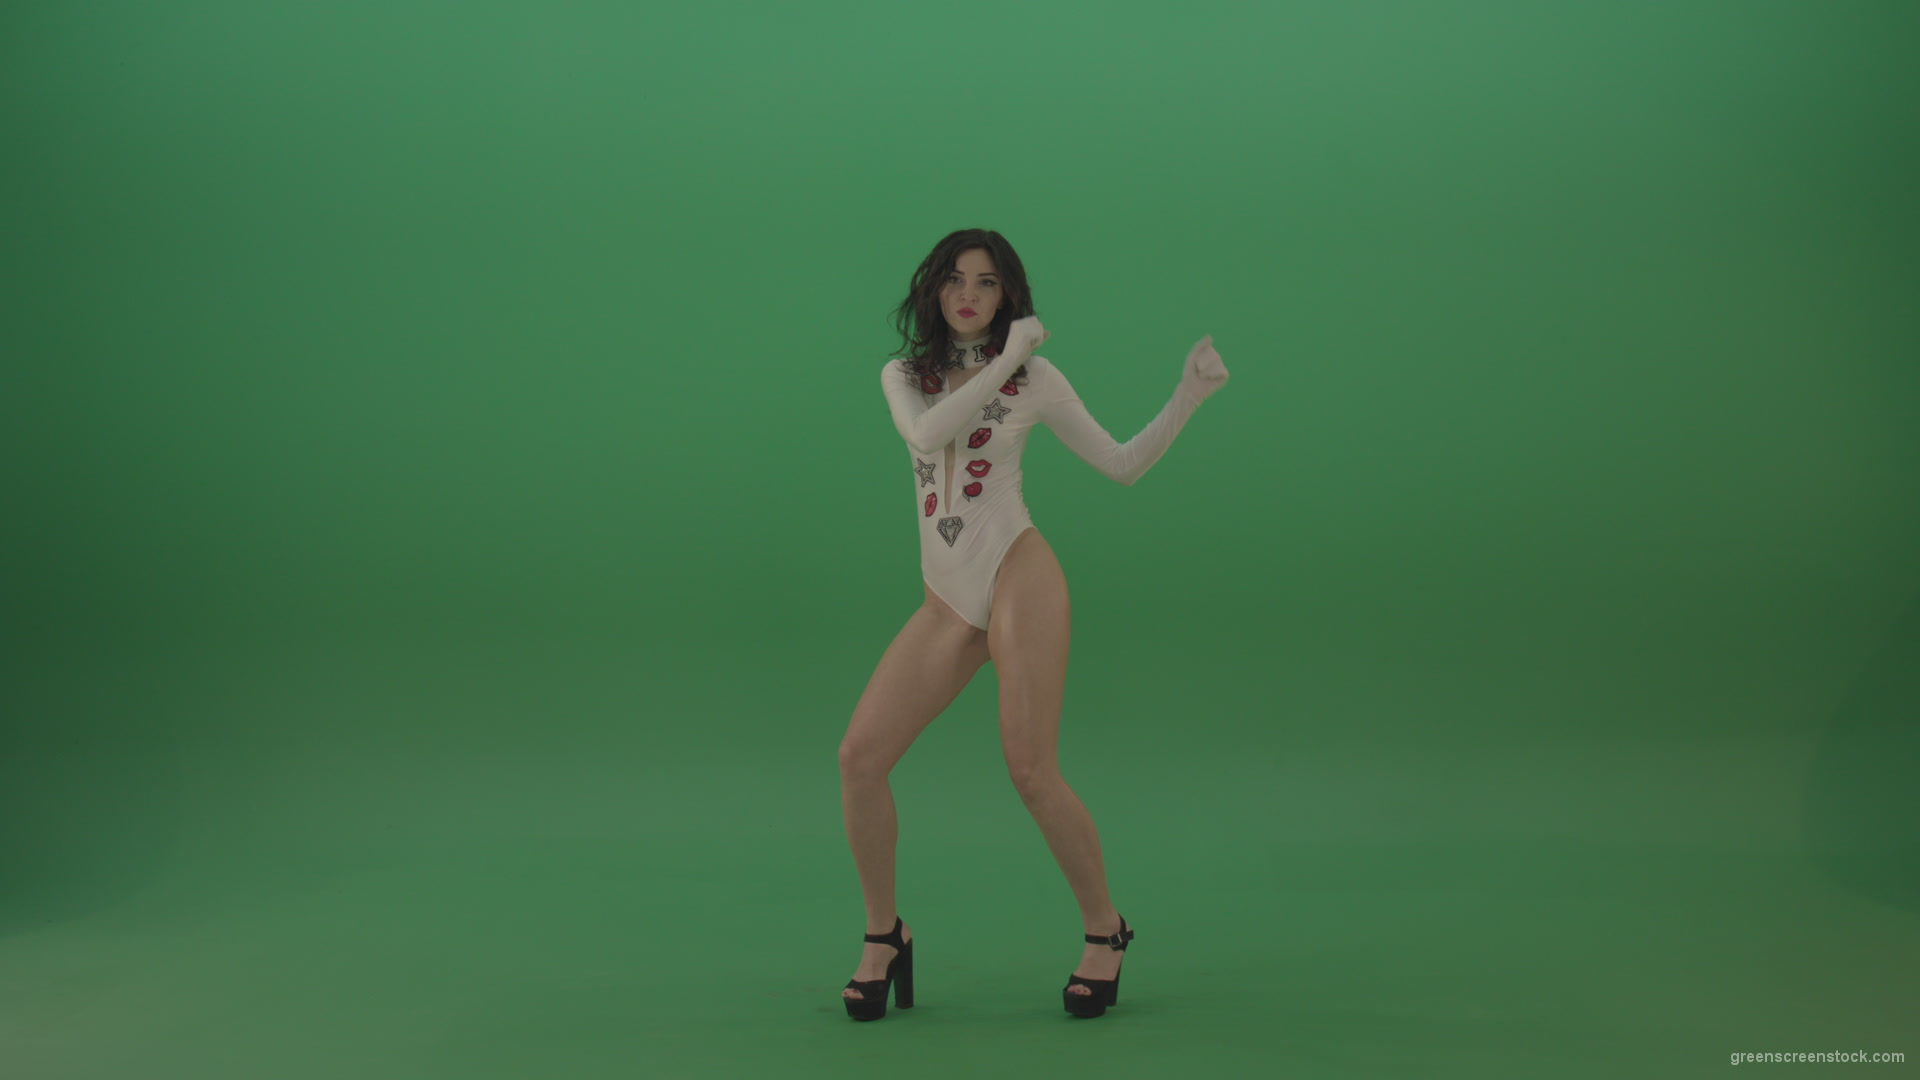 Sexy-woman-in-white-body-seductive-dance-on-green-background_002 Green Screen Stock